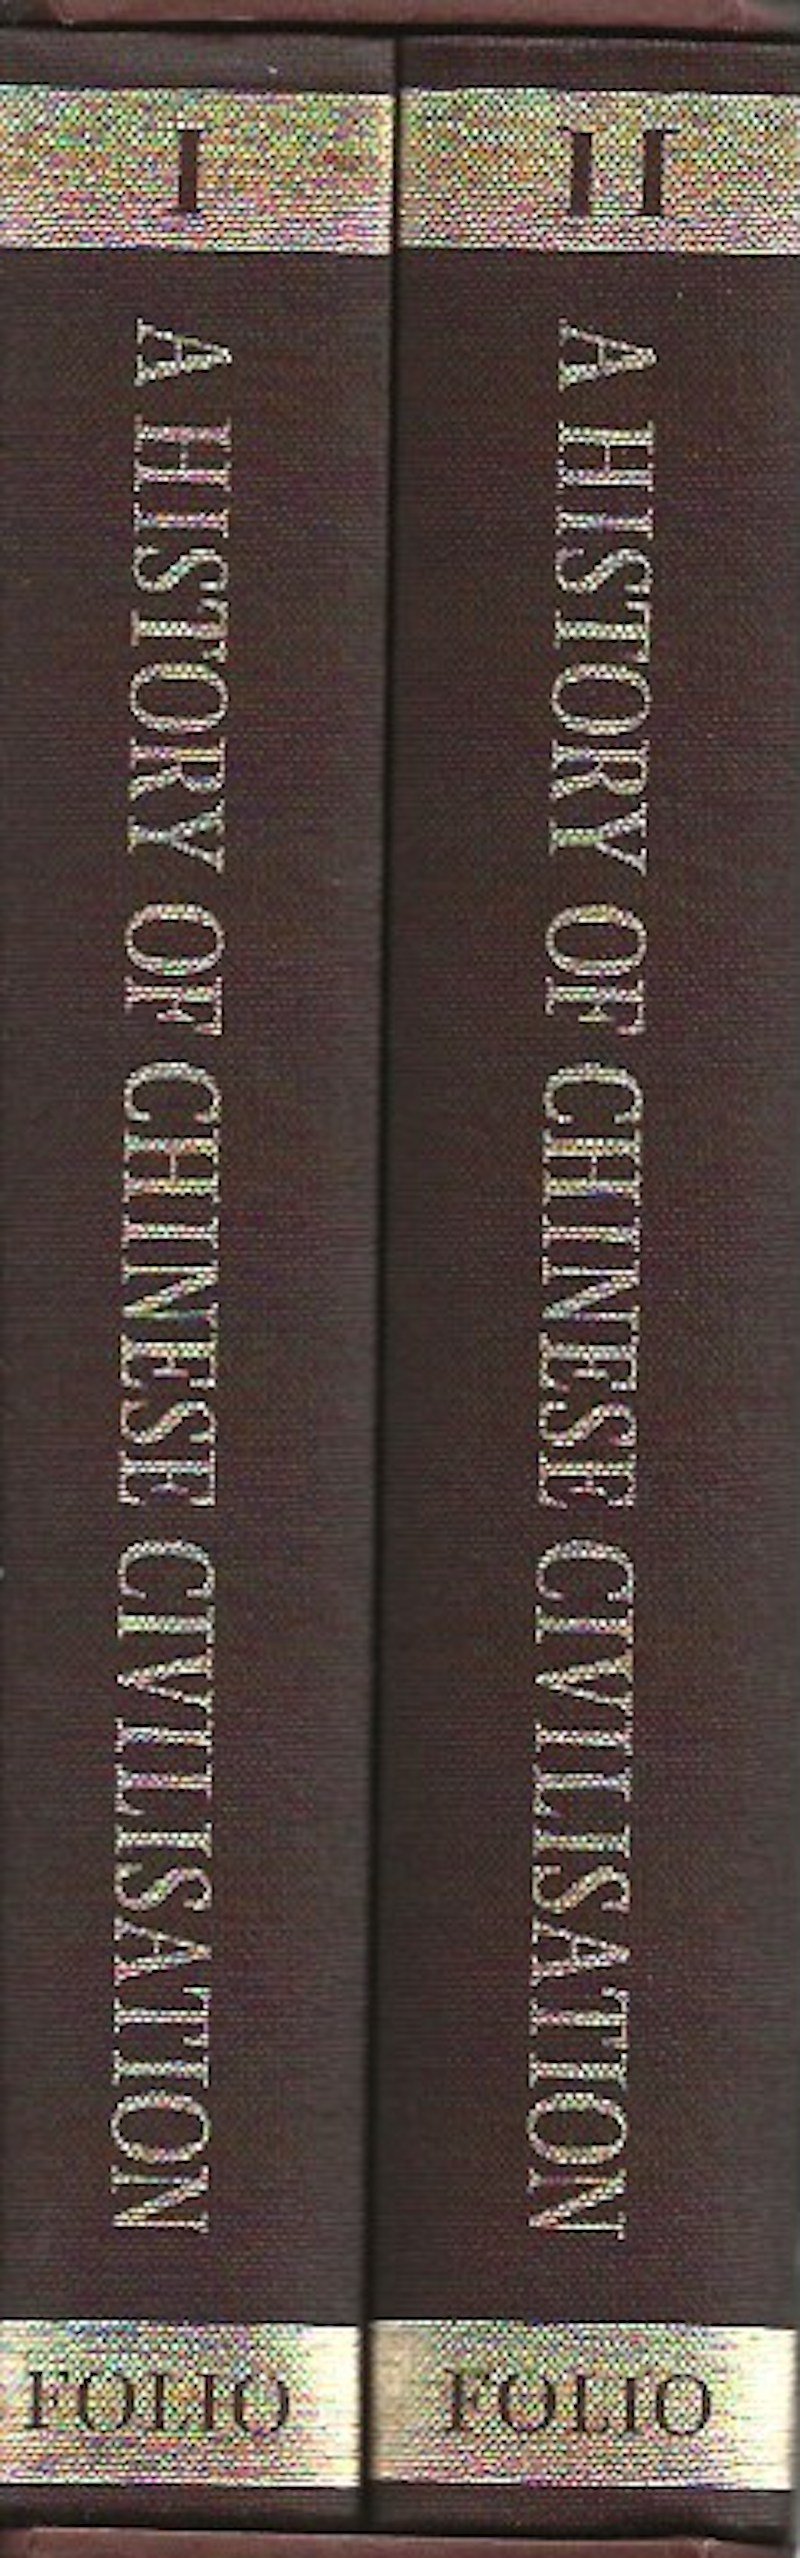 A History of Chinese Civilisation by Gernet, Jacques